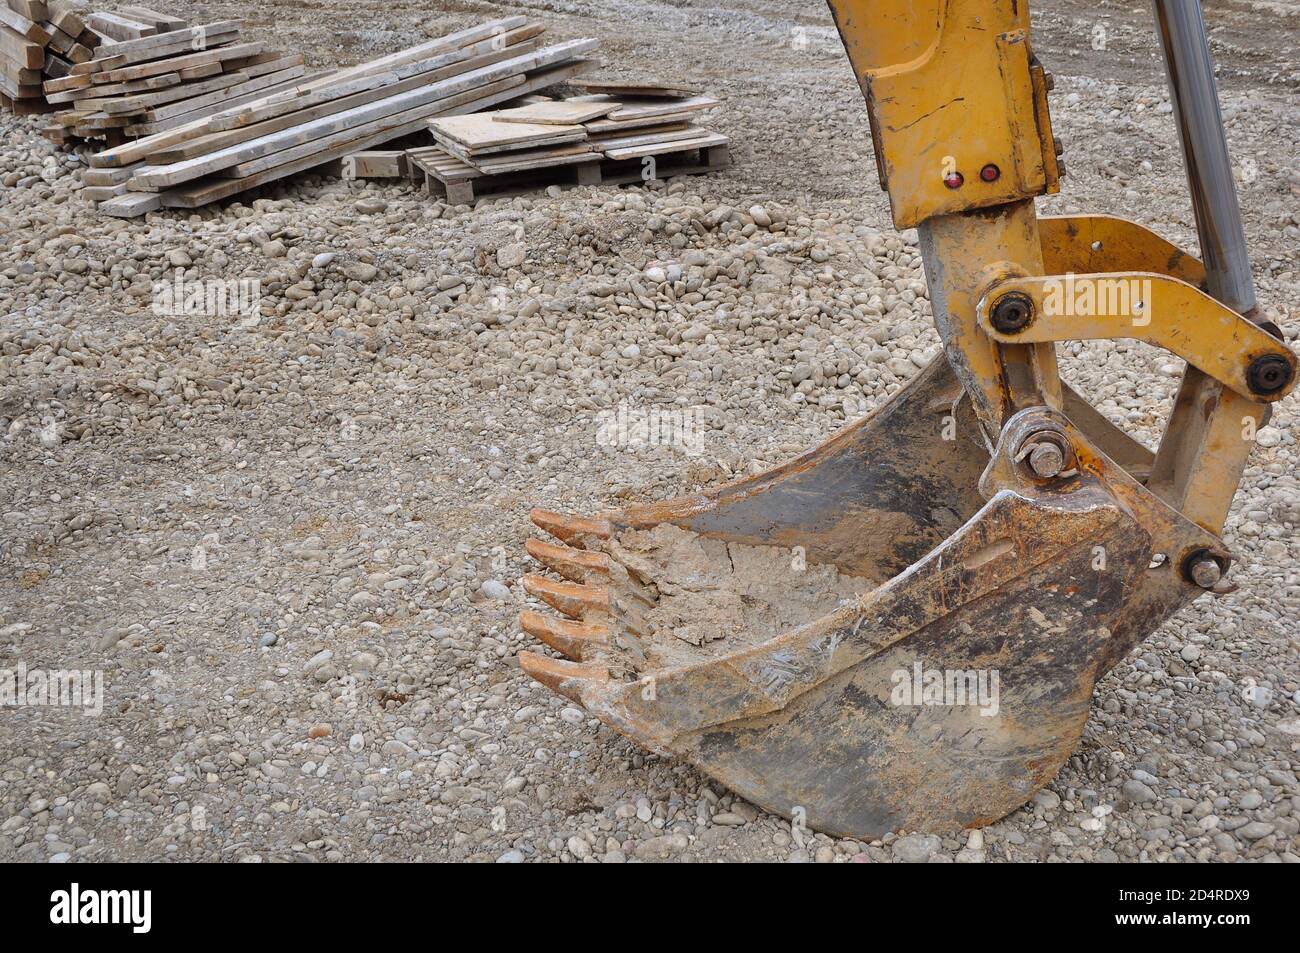 Bagger excavator on a construction site Stock Photo